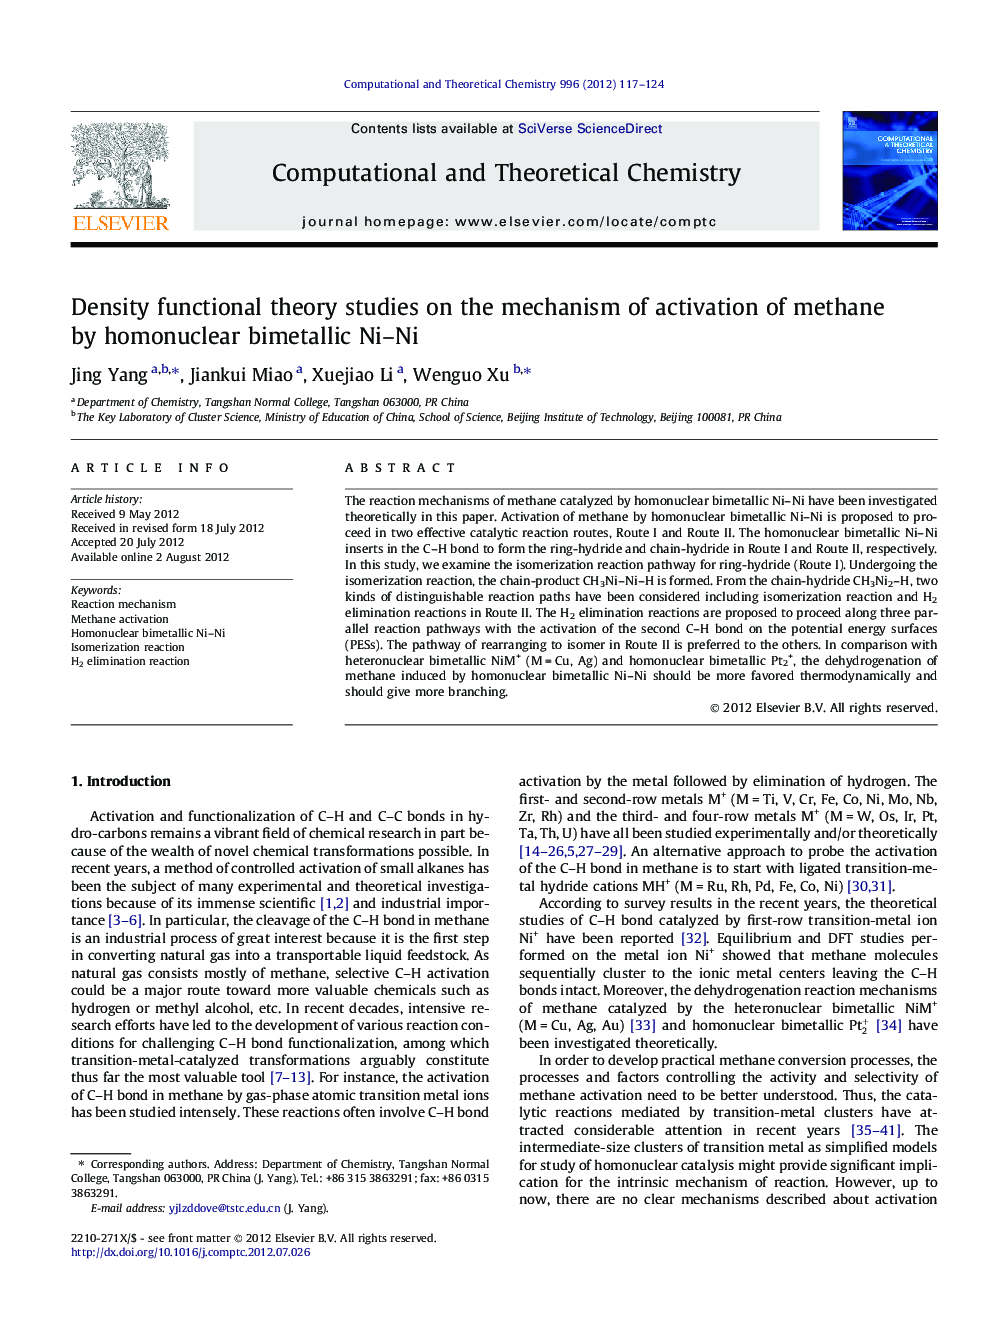 Density functional theory studies on the mechanism of activation of methane by homonuclear bimetallic Ni-Ni